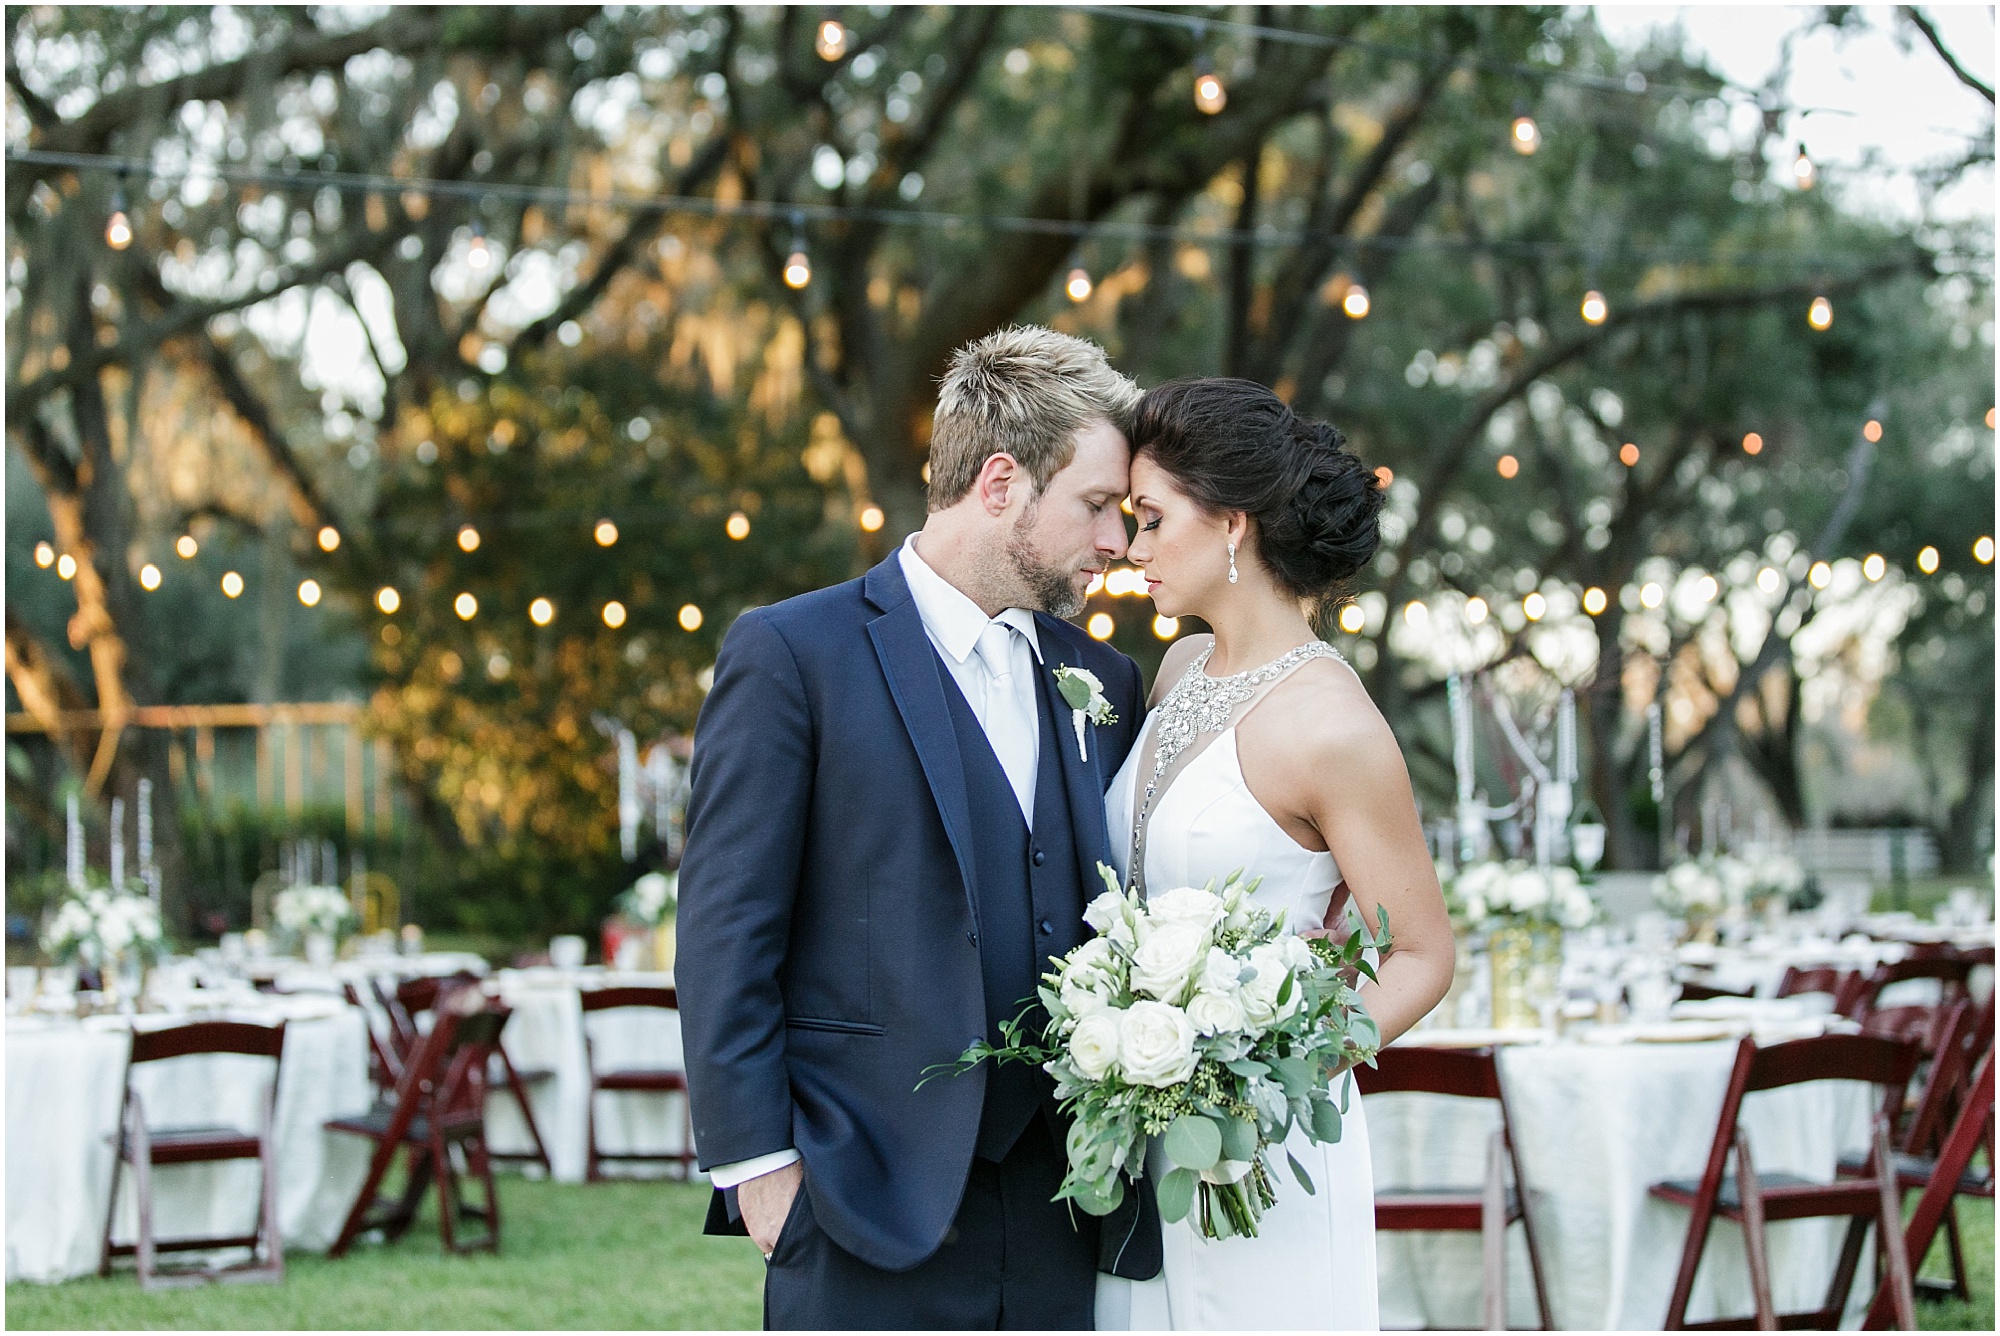 Bride and groom with their head together at their outdoor reception site at Rocking H Ranch.